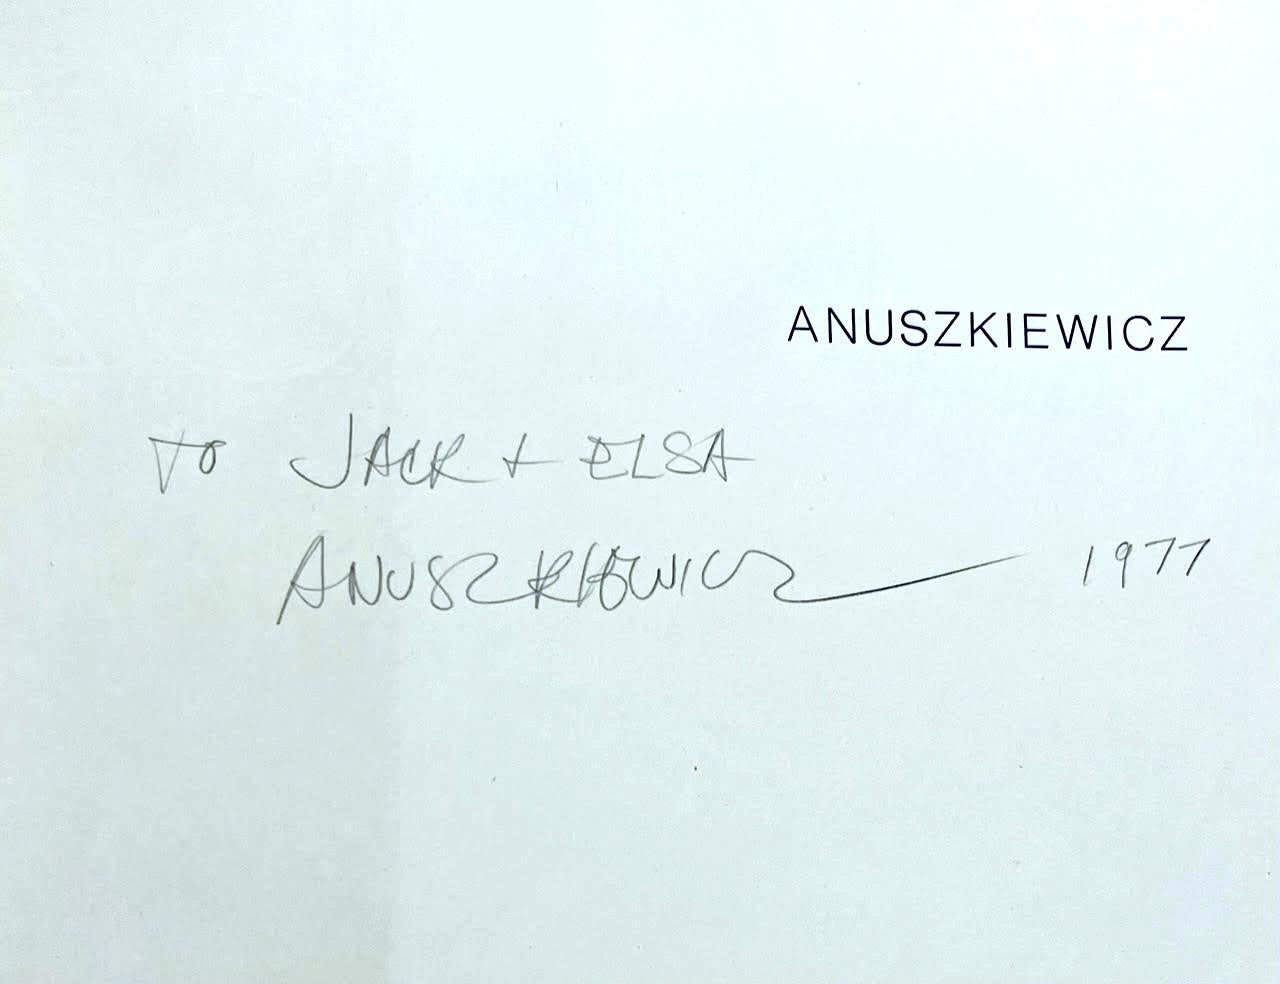 ANUSZKIEWICZ, monograph (hand signed and inscribed by Richard Anuszkiewicz) For Sale 1